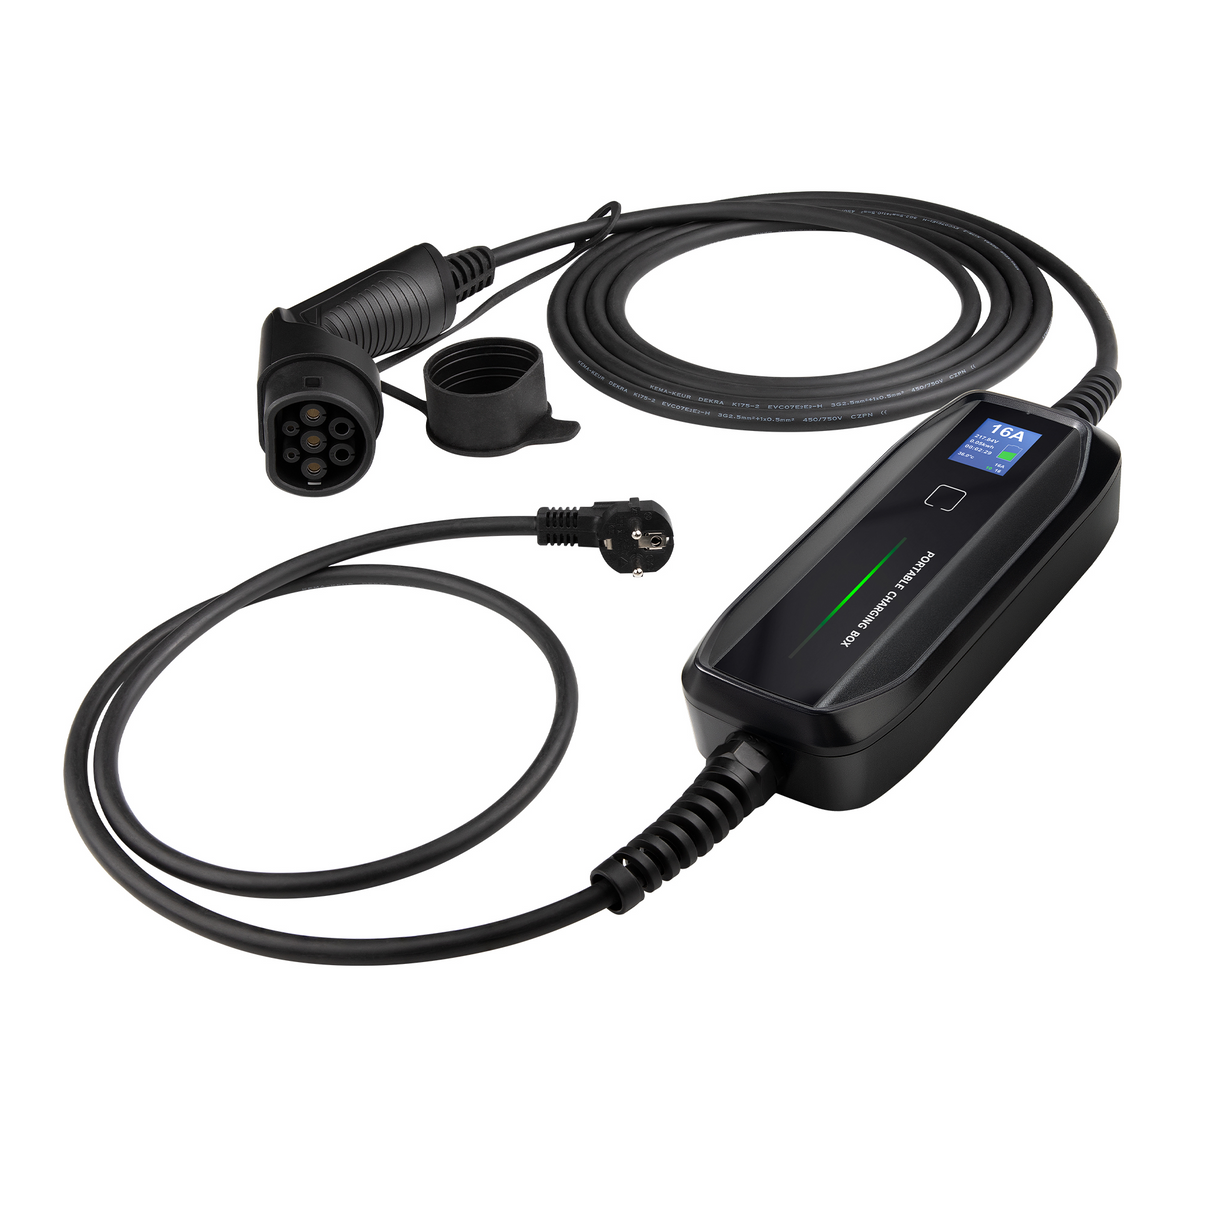 Mobile Charger Kia Sportage - Besen with LCD - Type 2 to Schuko